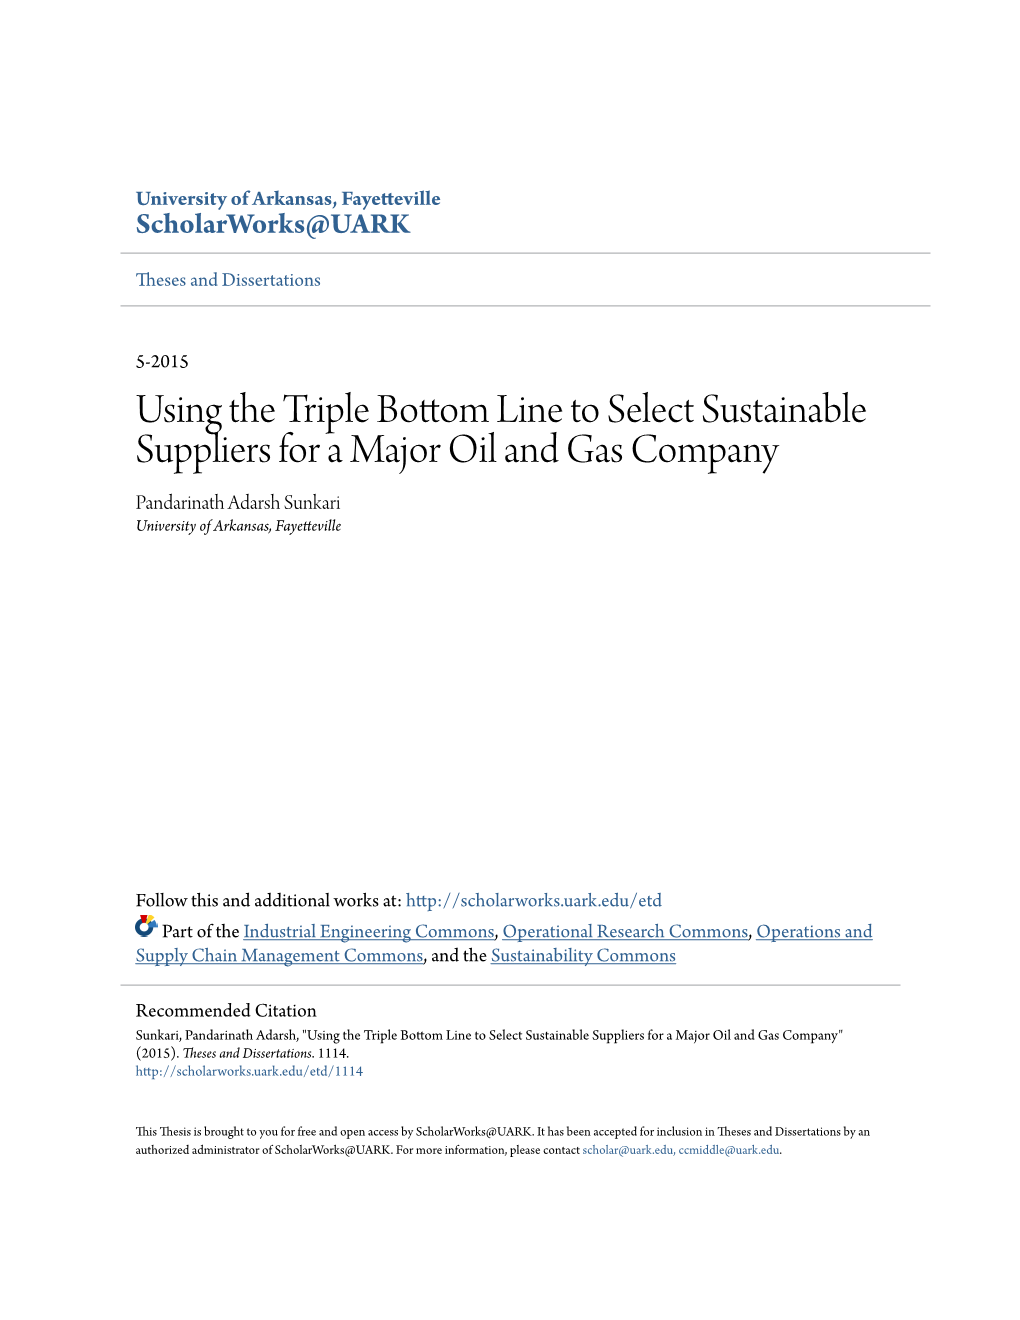 Using the Triple Bottom Line to Select Sustainable Suppliers for a Major Oil and Gas Company Pandarinath Adarsh Sunkari University of Arkansas, Fayetteville